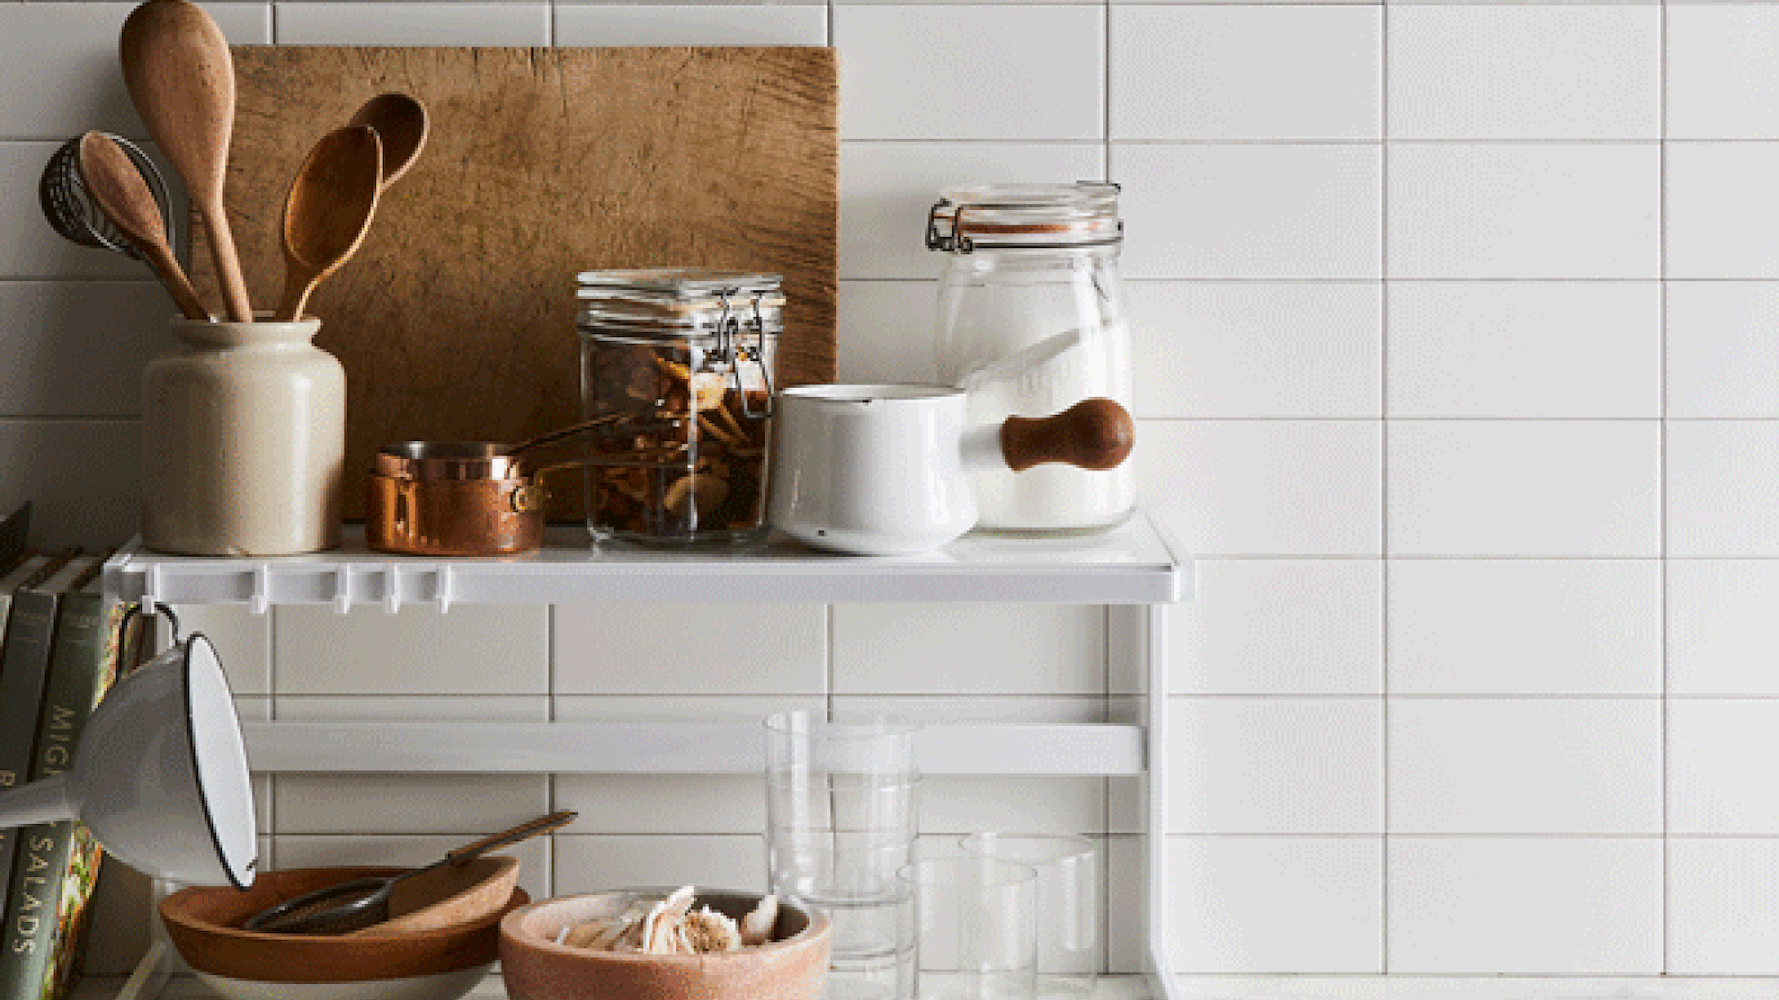 22 Products To Save Your Kitchen From The Claws Of Clutter